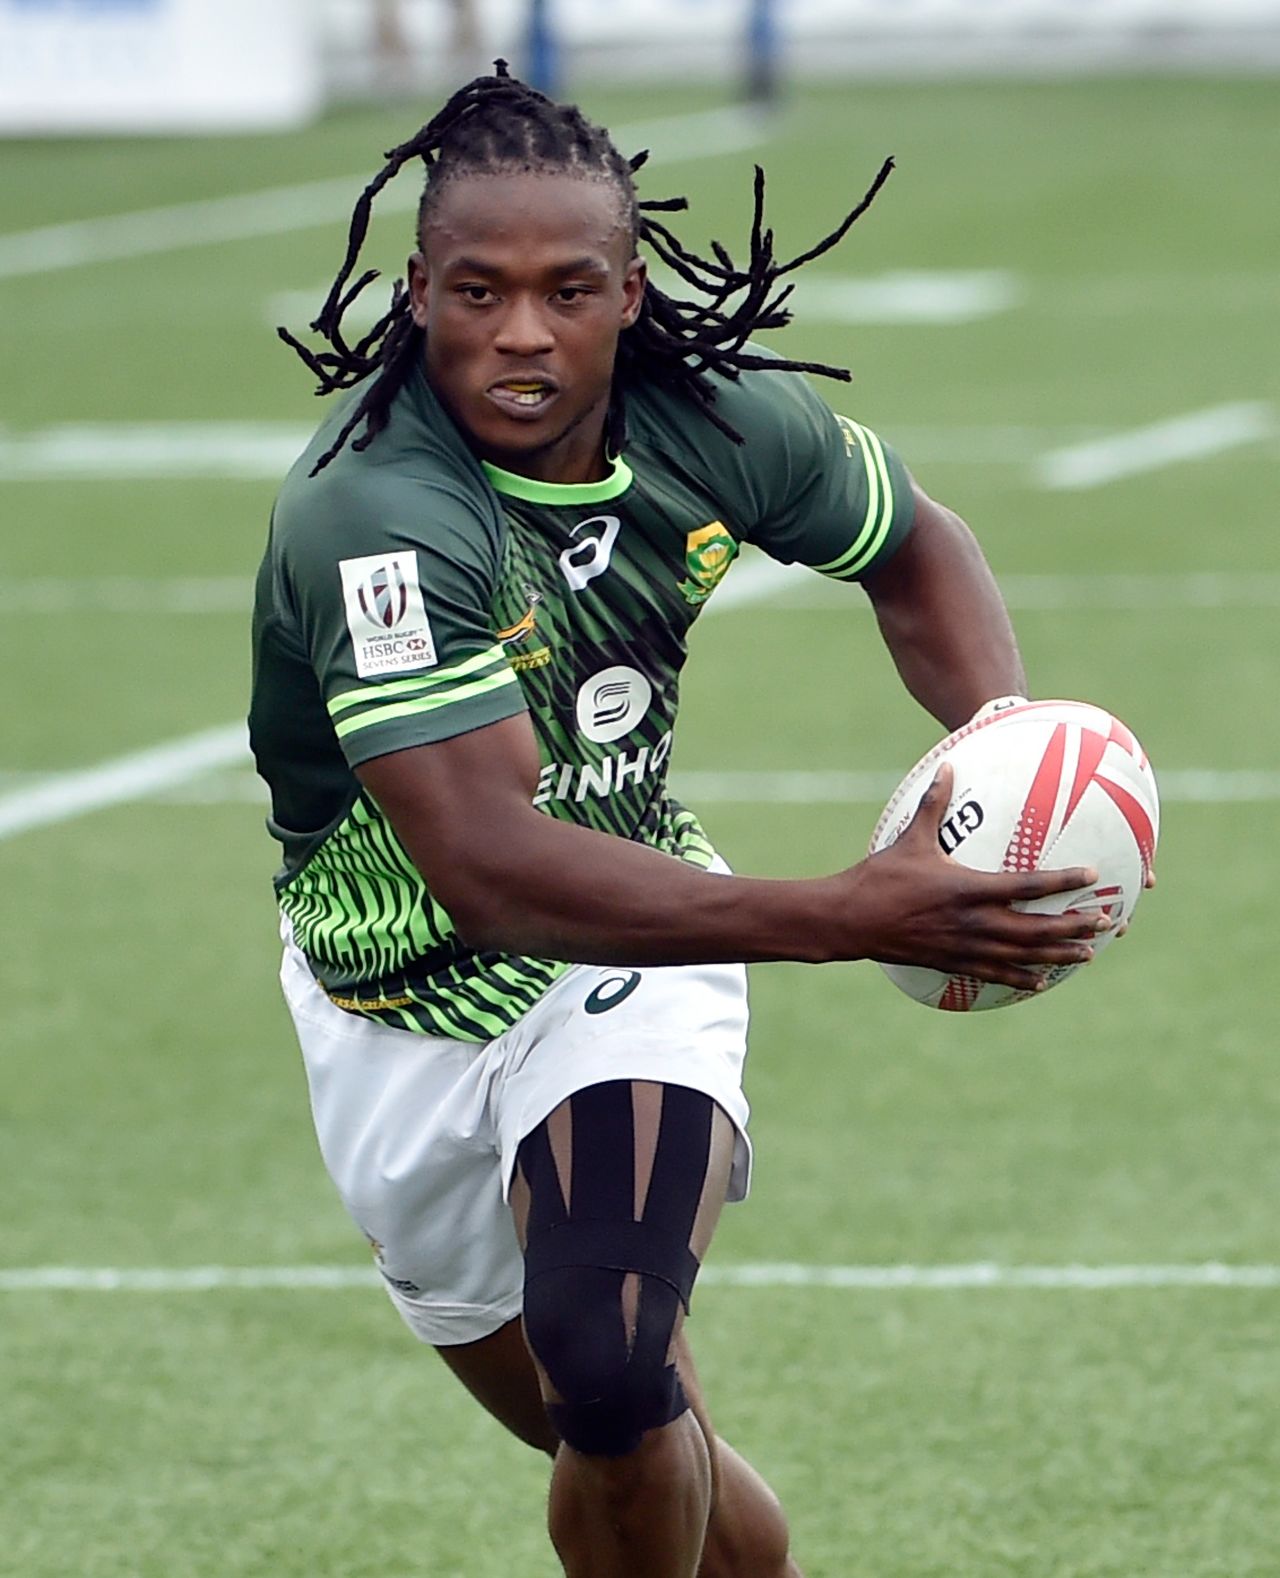 The "Welkom Wizard," top try scorer in each of the last two seasons, was named World Rugby's men's Sevens Player of the Year in 2016 following a series of scintillating displays. Now Senatla dreams of becoming World Player of the Year in XVs, as he <a href="http://edition.cnn.com/2017/02/23/sport/seabelo-senatla-south-africa-sevens-rugby/index.html">told CNN Sport </a>earlier this year. 